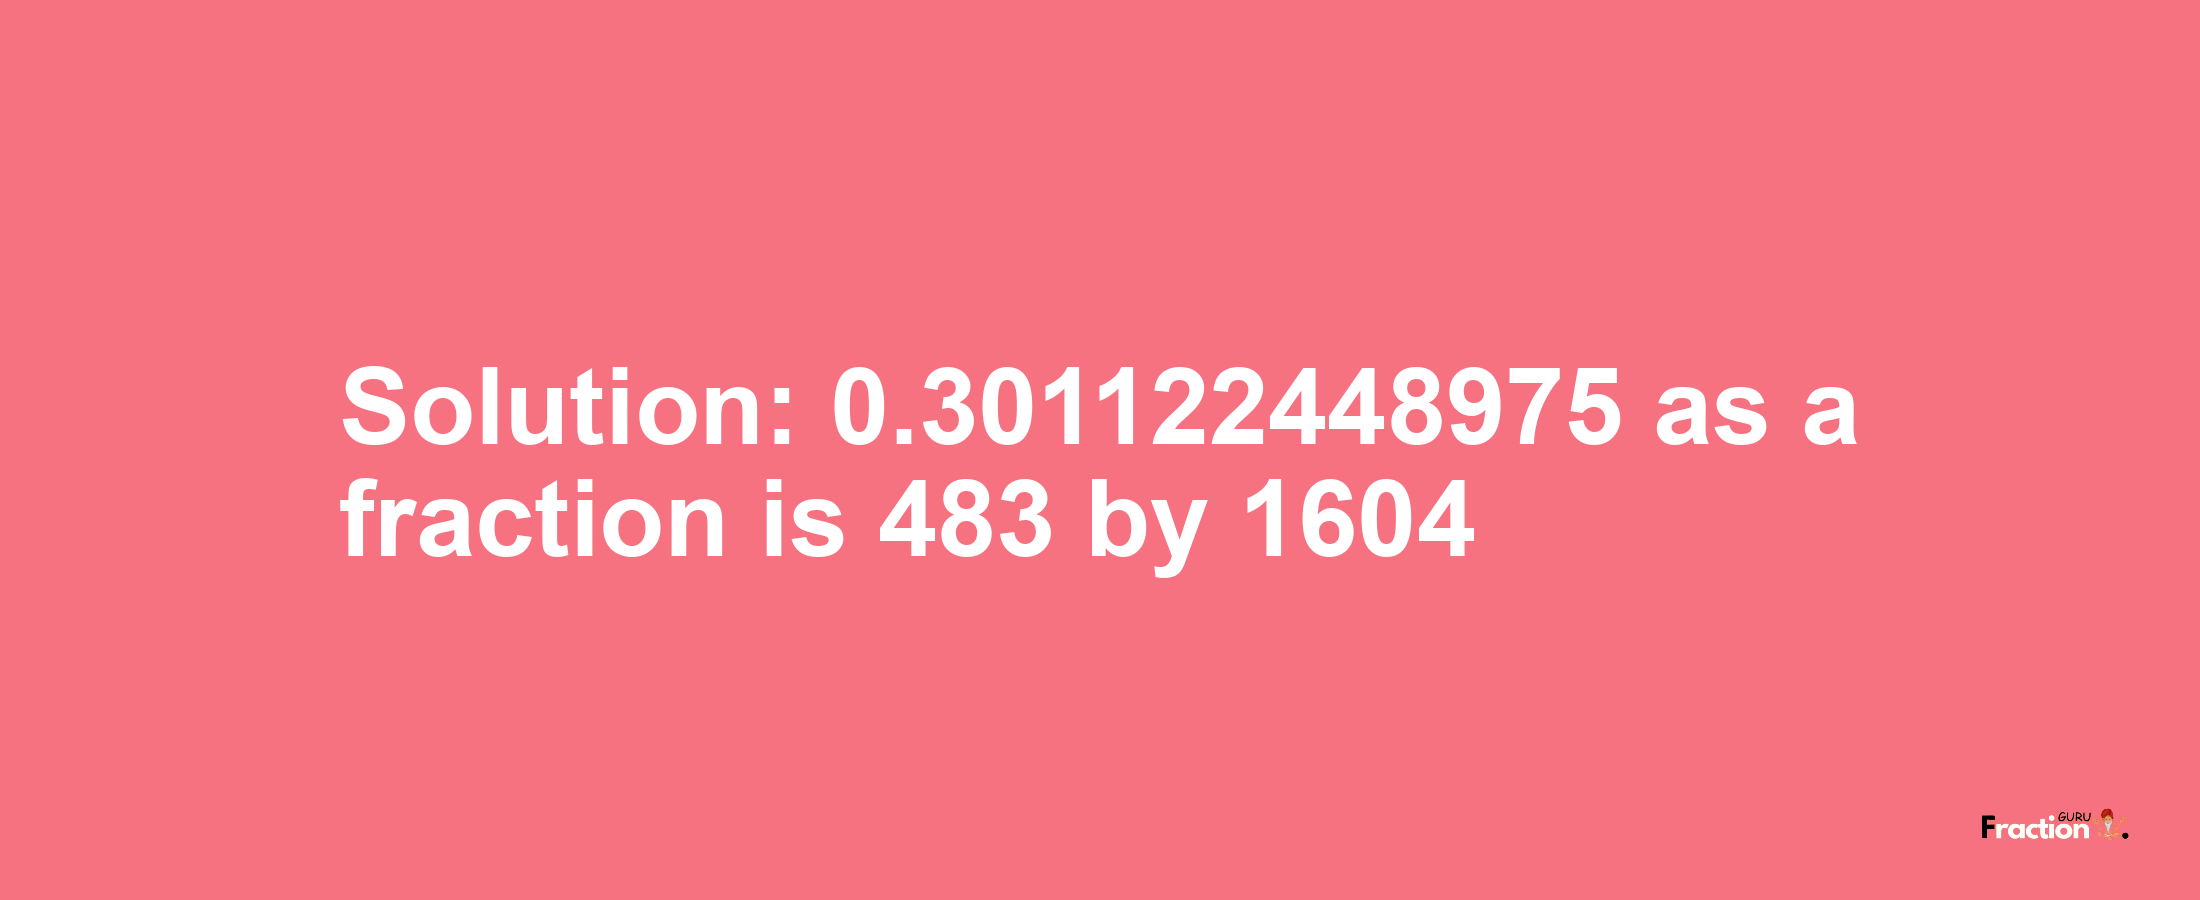 Solution:0.301122448975 as a fraction is 483/1604